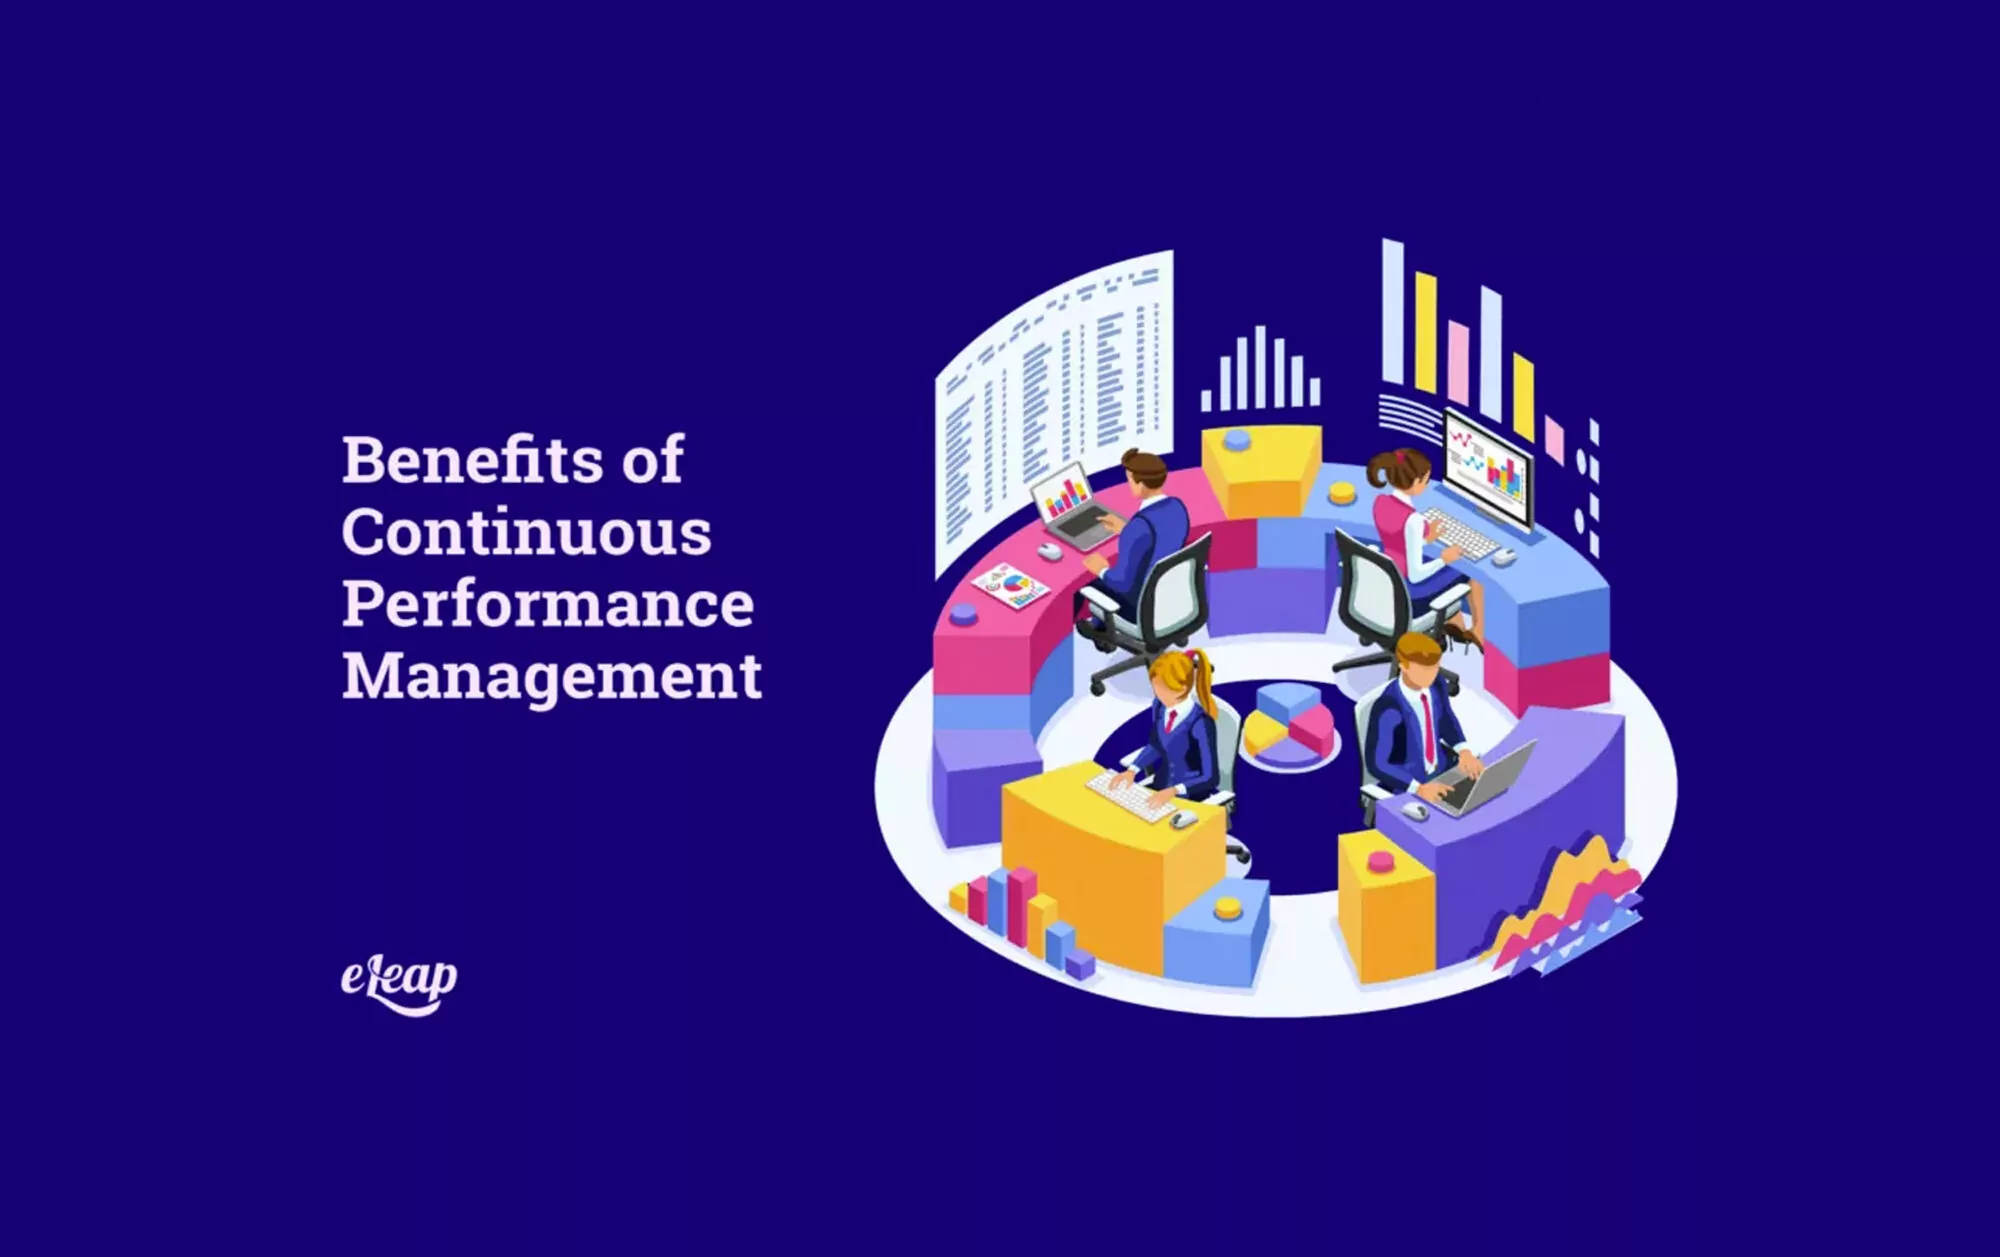 Benefits of Continuous Performance Management